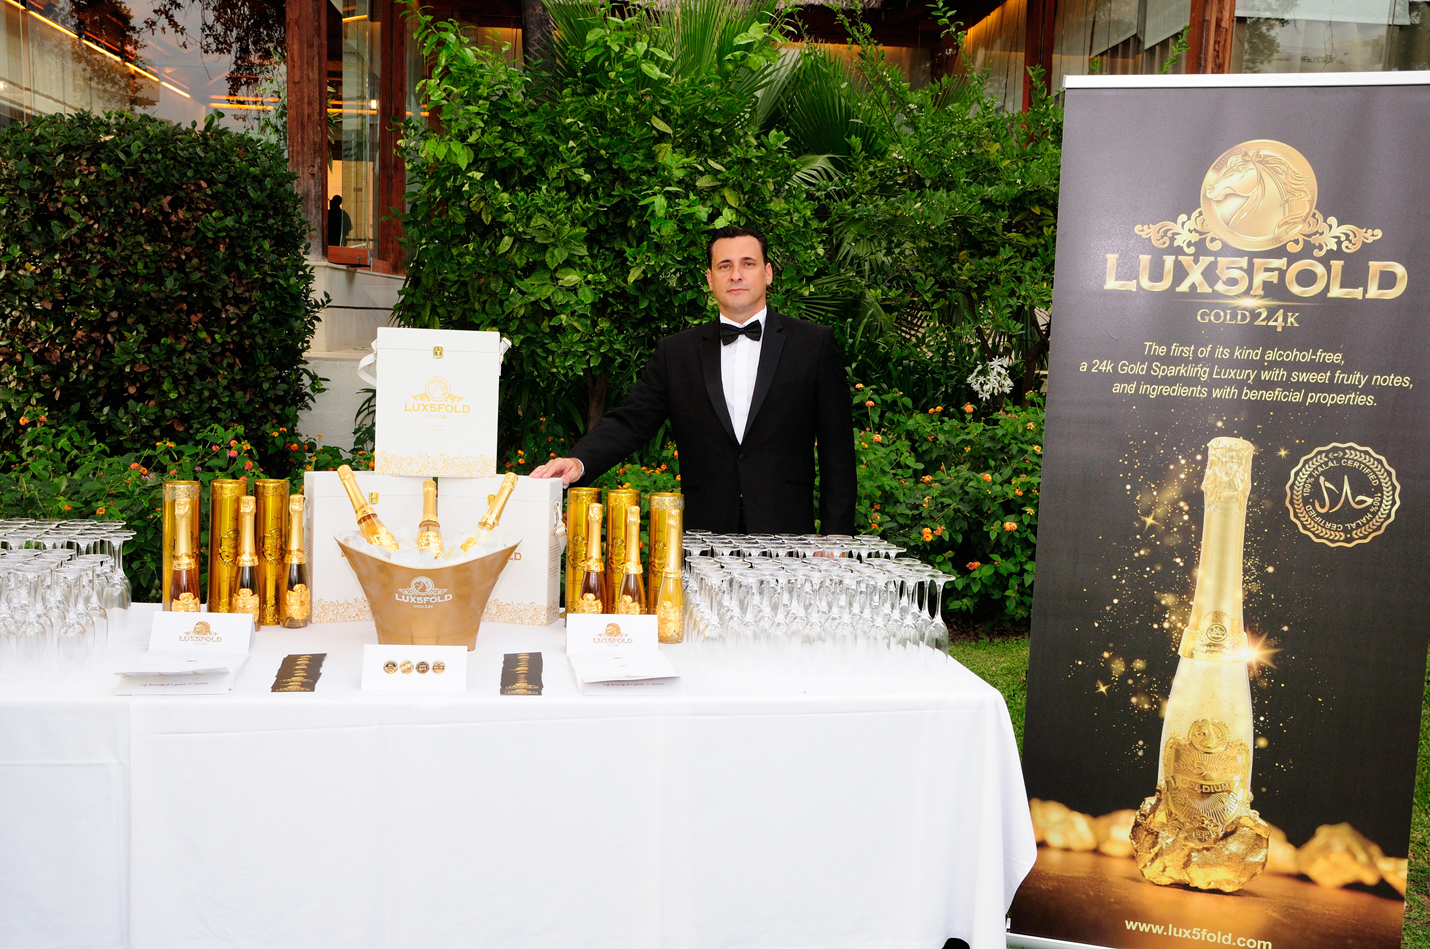 lux5fold-–-the-world’s-first-24k-gold-sparkling-luxury